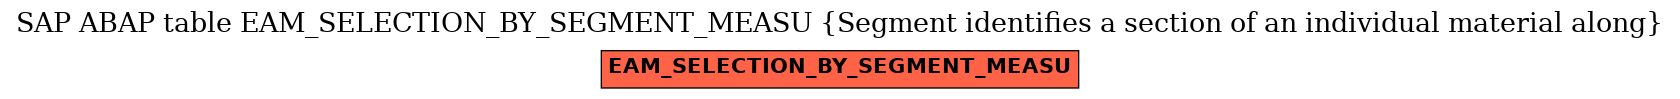 E-R Diagram for table EAM_SELECTION_BY_SEGMENT_MEASU (Segment identifies a section of an individual material along)